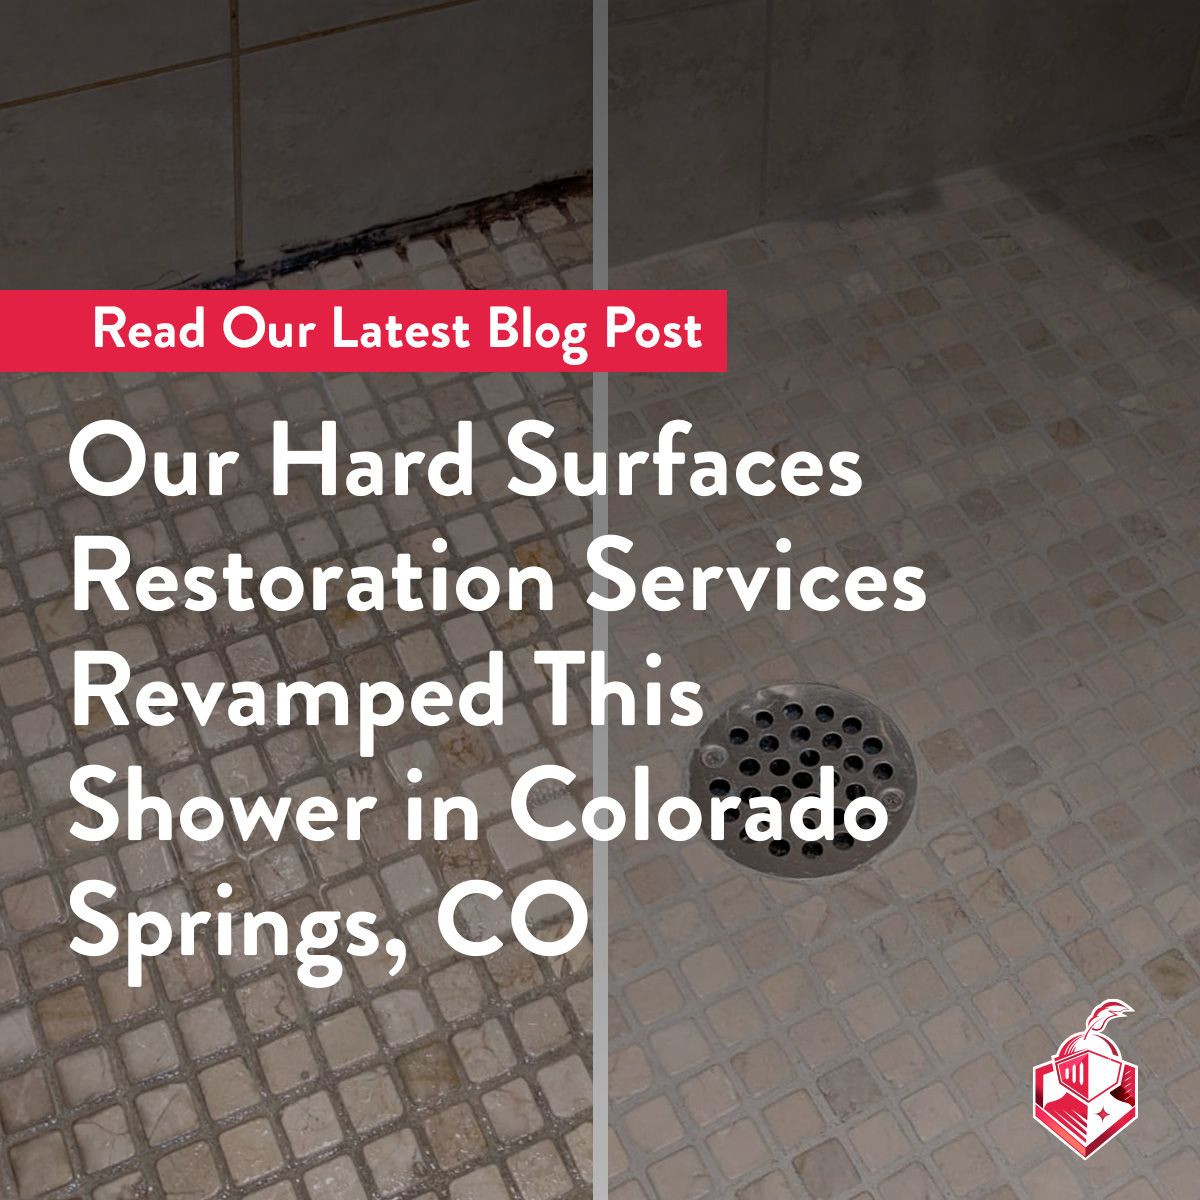 Our hard surfaces restoration services revamped this shower in Colorado Springs, CO!